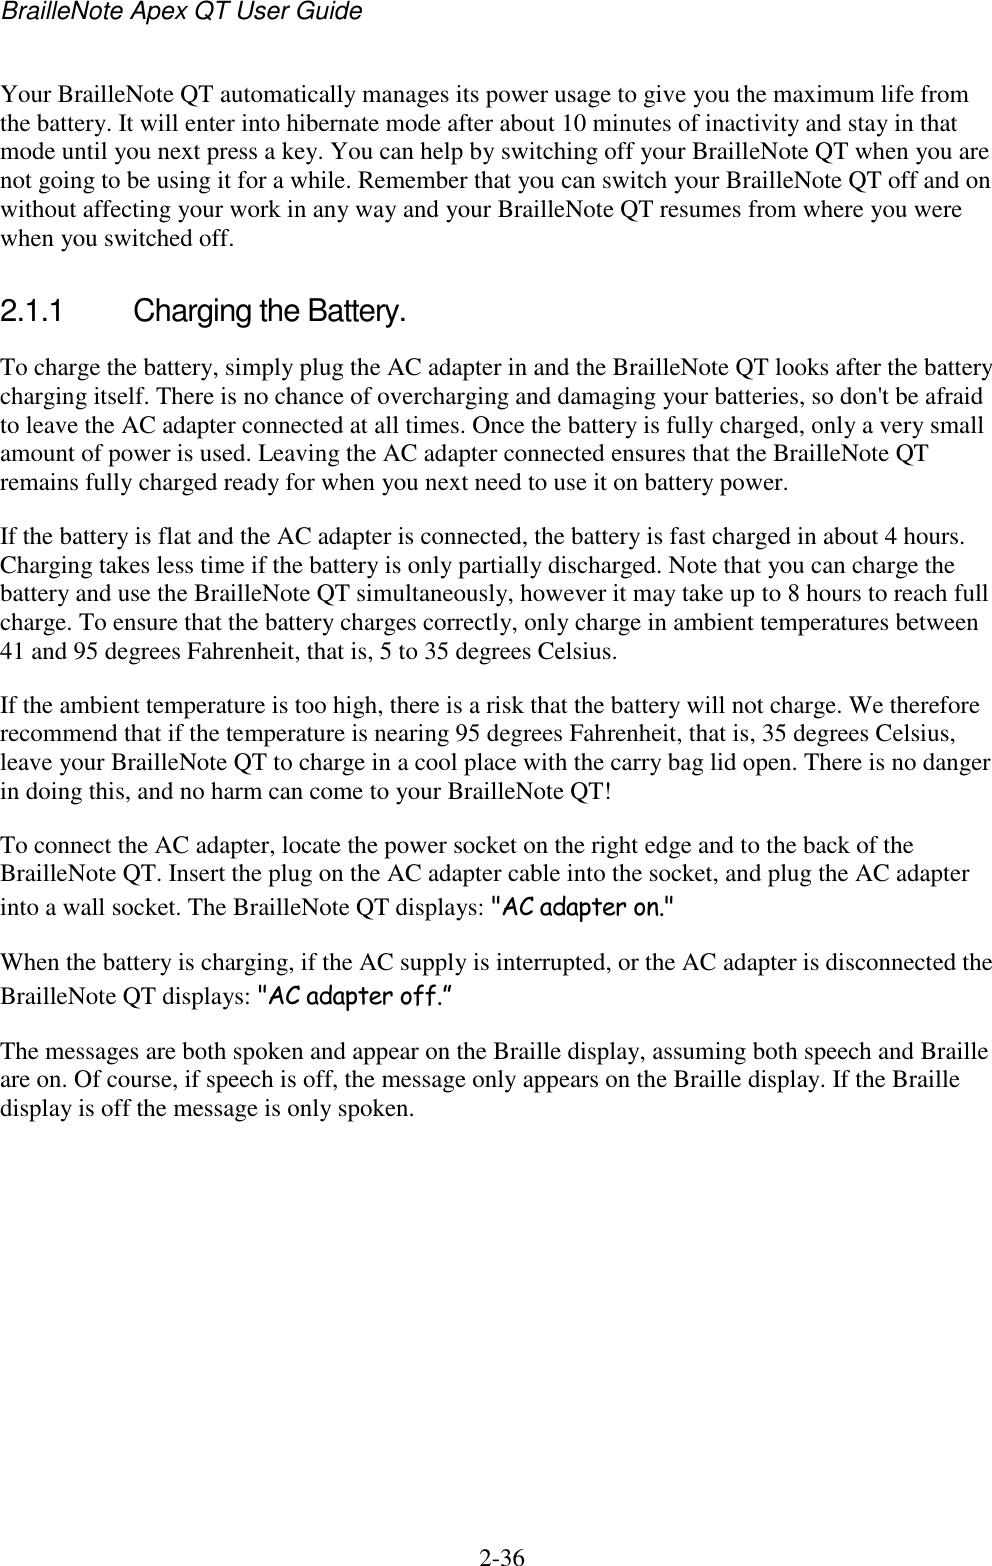 BrailleNote Apex QT User Guide  2-36   Your BrailleNote QT automatically manages its power usage to give you the maximum life from the battery. It will enter into hibernate mode after about 10 minutes of inactivity and stay in that mode until you next press a key. You can help by switching off your BrailleNote QT when you are not going to be using it for a while. Remember that you can switch your BrailleNote QT off and on without affecting your work in any way and your BrailleNote QT resumes from where you were when you switched off.  2.1.1  Charging the Battery. To charge the battery, simply plug the AC adapter in and the BrailleNote QT looks after the battery charging itself. There is no chance of overcharging and damaging your batteries, so don&apos;t be afraid to leave the AC adapter connected at all times. Once the battery is fully charged, only a very small amount of power is used. Leaving the AC adapter connected ensures that the BrailleNote QT remains fully charged ready for when you next need to use it on battery power. If the battery is flat and the AC adapter is connected, the battery is fast charged in about 4 hours. Charging takes less time if the battery is only partially discharged. Note that you can charge the battery and use the BrailleNote QT simultaneously, however it may take up to 8 hours to reach full charge. To ensure that the battery charges correctly, only charge in ambient temperatures between 41 and 95 degrees Fahrenheit, that is, 5 to 35 degrees Celsius.  If the ambient temperature is too high, there is a risk that the battery will not charge. We therefore recommend that if the temperature is nearing 95 degrees Fahrenheit, that is, 35 degrees Celsius, leave your BrailleNote QT to charge in a cool place with the carry bag lid open. There is no danger in doing this, and no harm can come to your BrailleNote QT! To connect the AC adapter, locate the power socket on the right edge and to the back of the BrailleNote QT. Insert the plug on the AC adapter cable into the socket, and plug the AC adapter into a wall socket. The BrailleNote QT displays: &quot;AC adapter on.&quot; When the battery is charging, if the AC supply is interrupted, or the AC adapter is disconnected the BrailleNote QT displays: &quot;AC adapter off.” The messages are both spoken and appear on the Braille display, assuming both speech and Braille are on. Of course, if speech is off, the message only appears on the Braille display. If the Braille display is off the message is only spoken.   